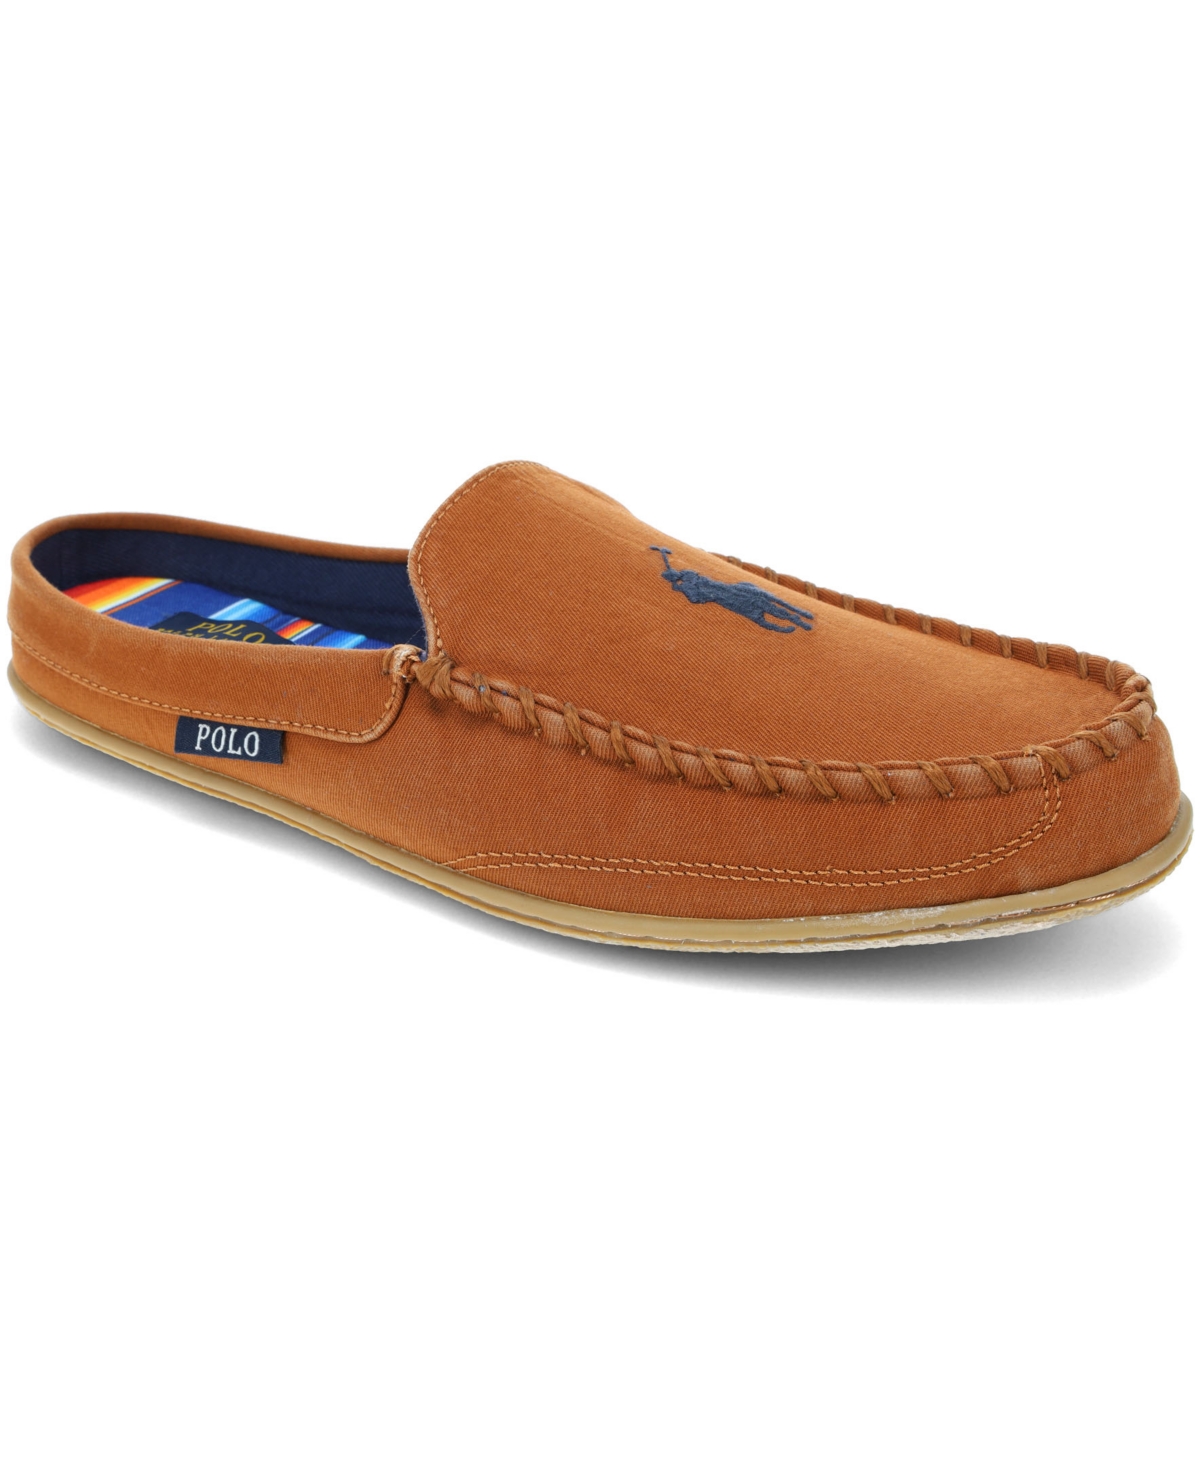 POLO RALPH LAUREN MEN'S COLLINS WASHED CHINO MULE